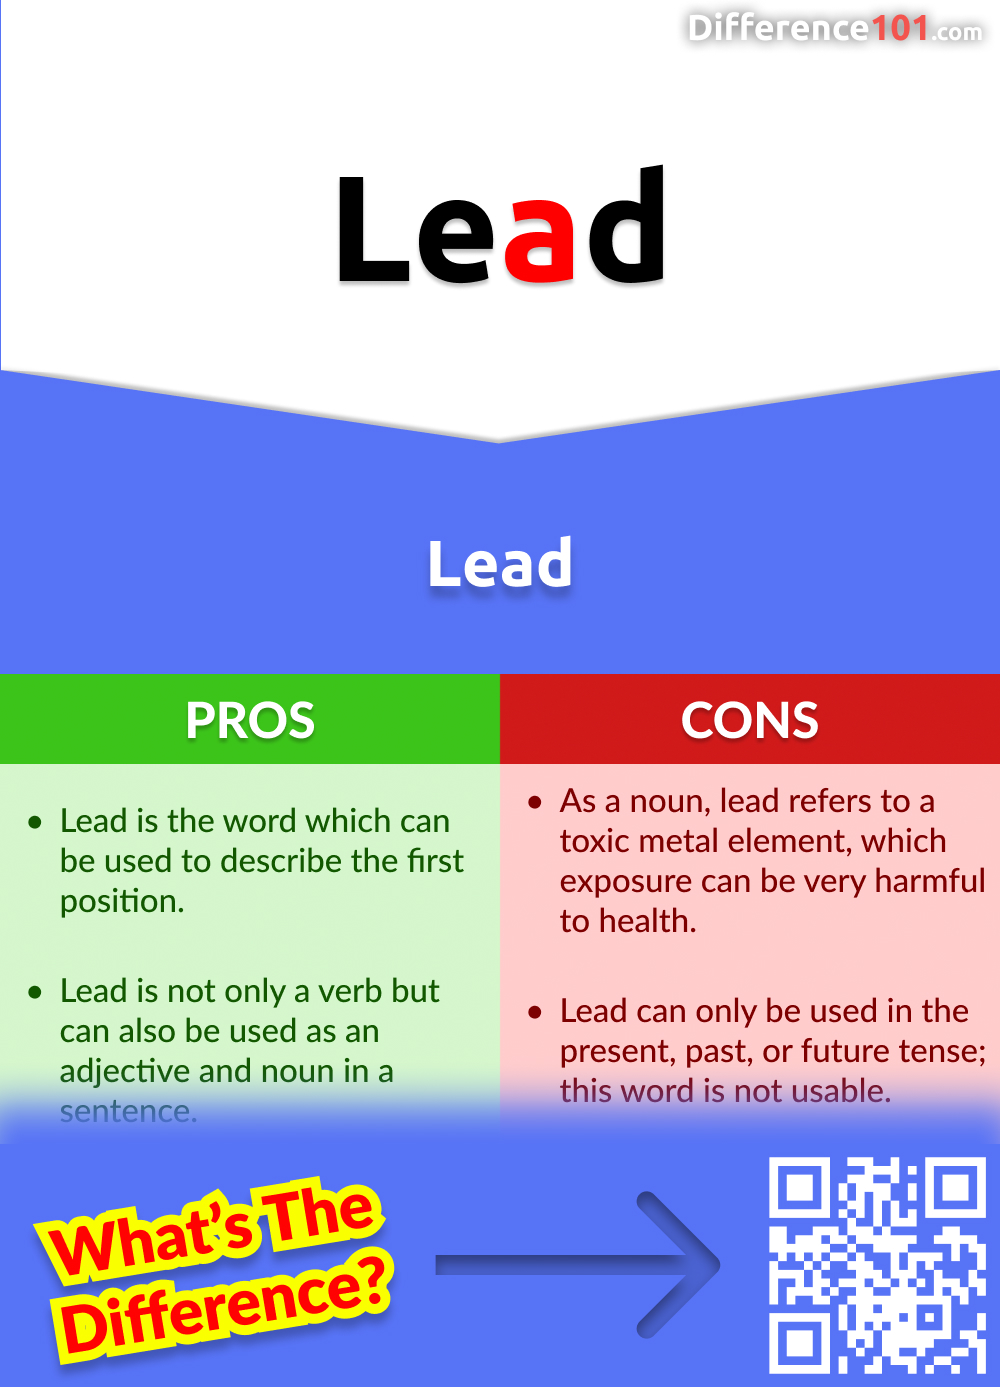 Lead Pros and Cons